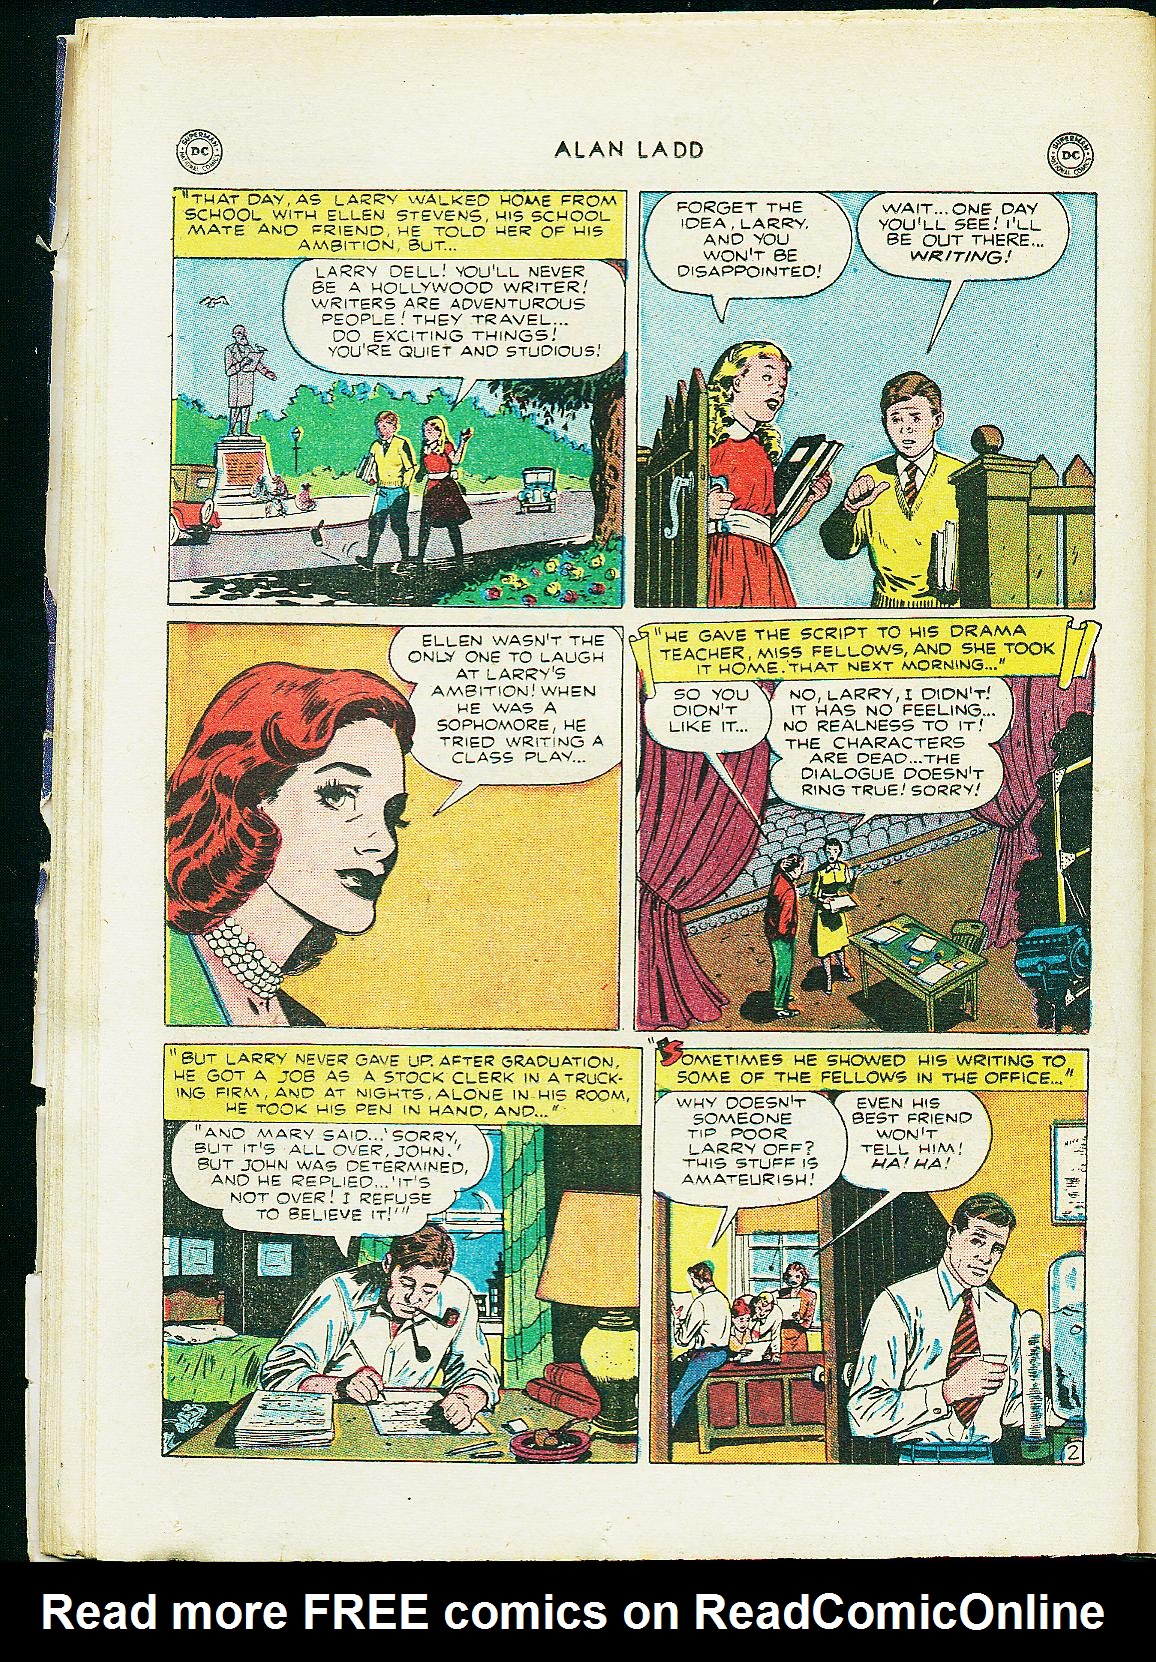 Read online Adventures of Alan Ladd comic -  Issue #1 - 36